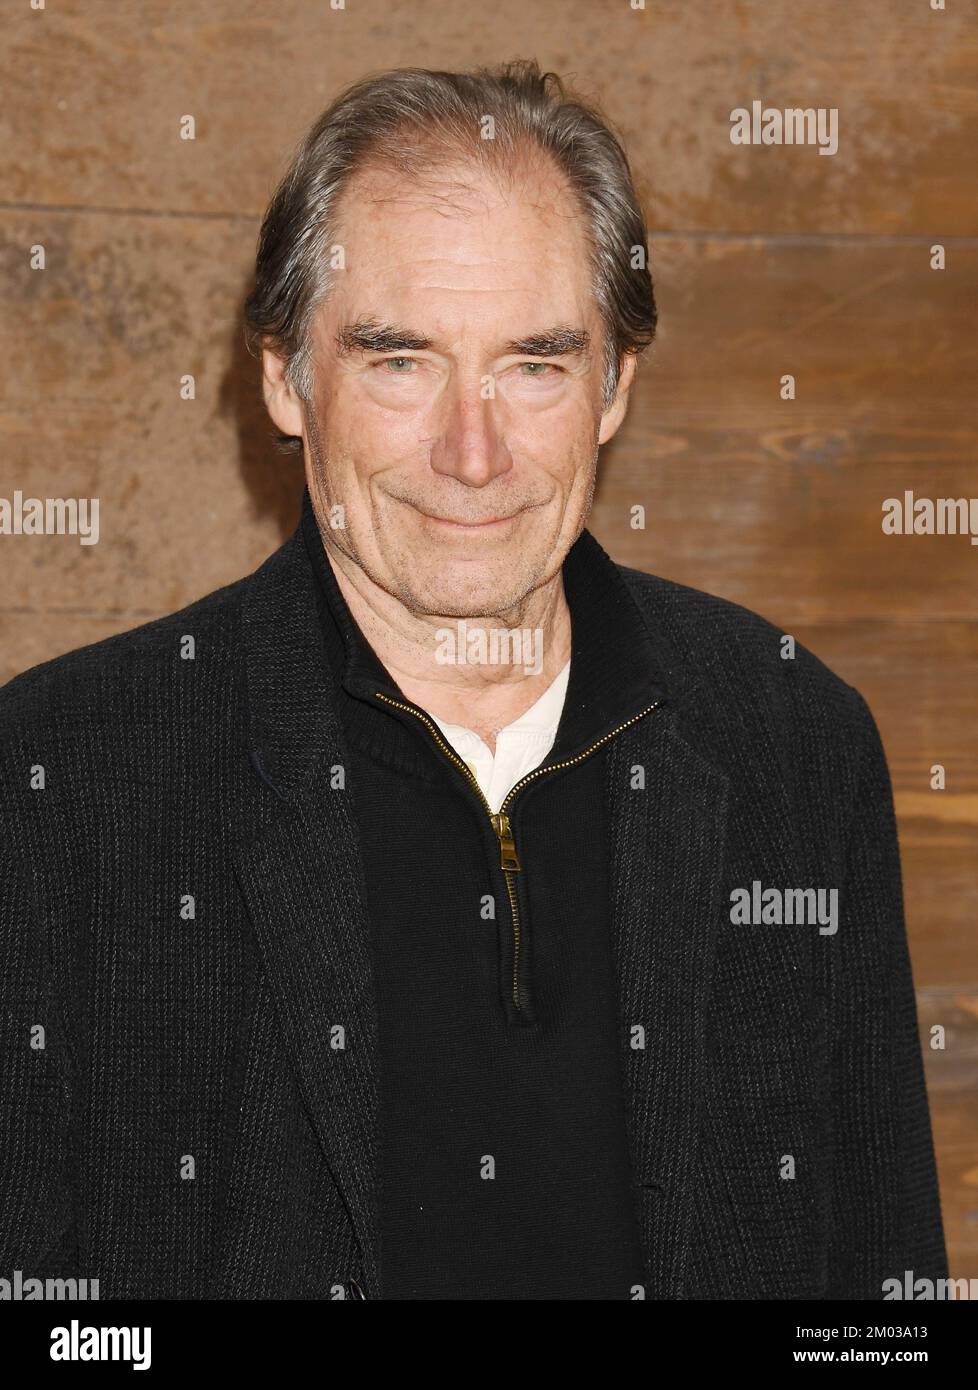 LOS ANGELES, CALIFORNIA - DECEMBER 02: Timothy Dalton attends the Los Angeles Premiere Of Paramount+'s '1923' at Hollywood American Legion on December Stock Photo